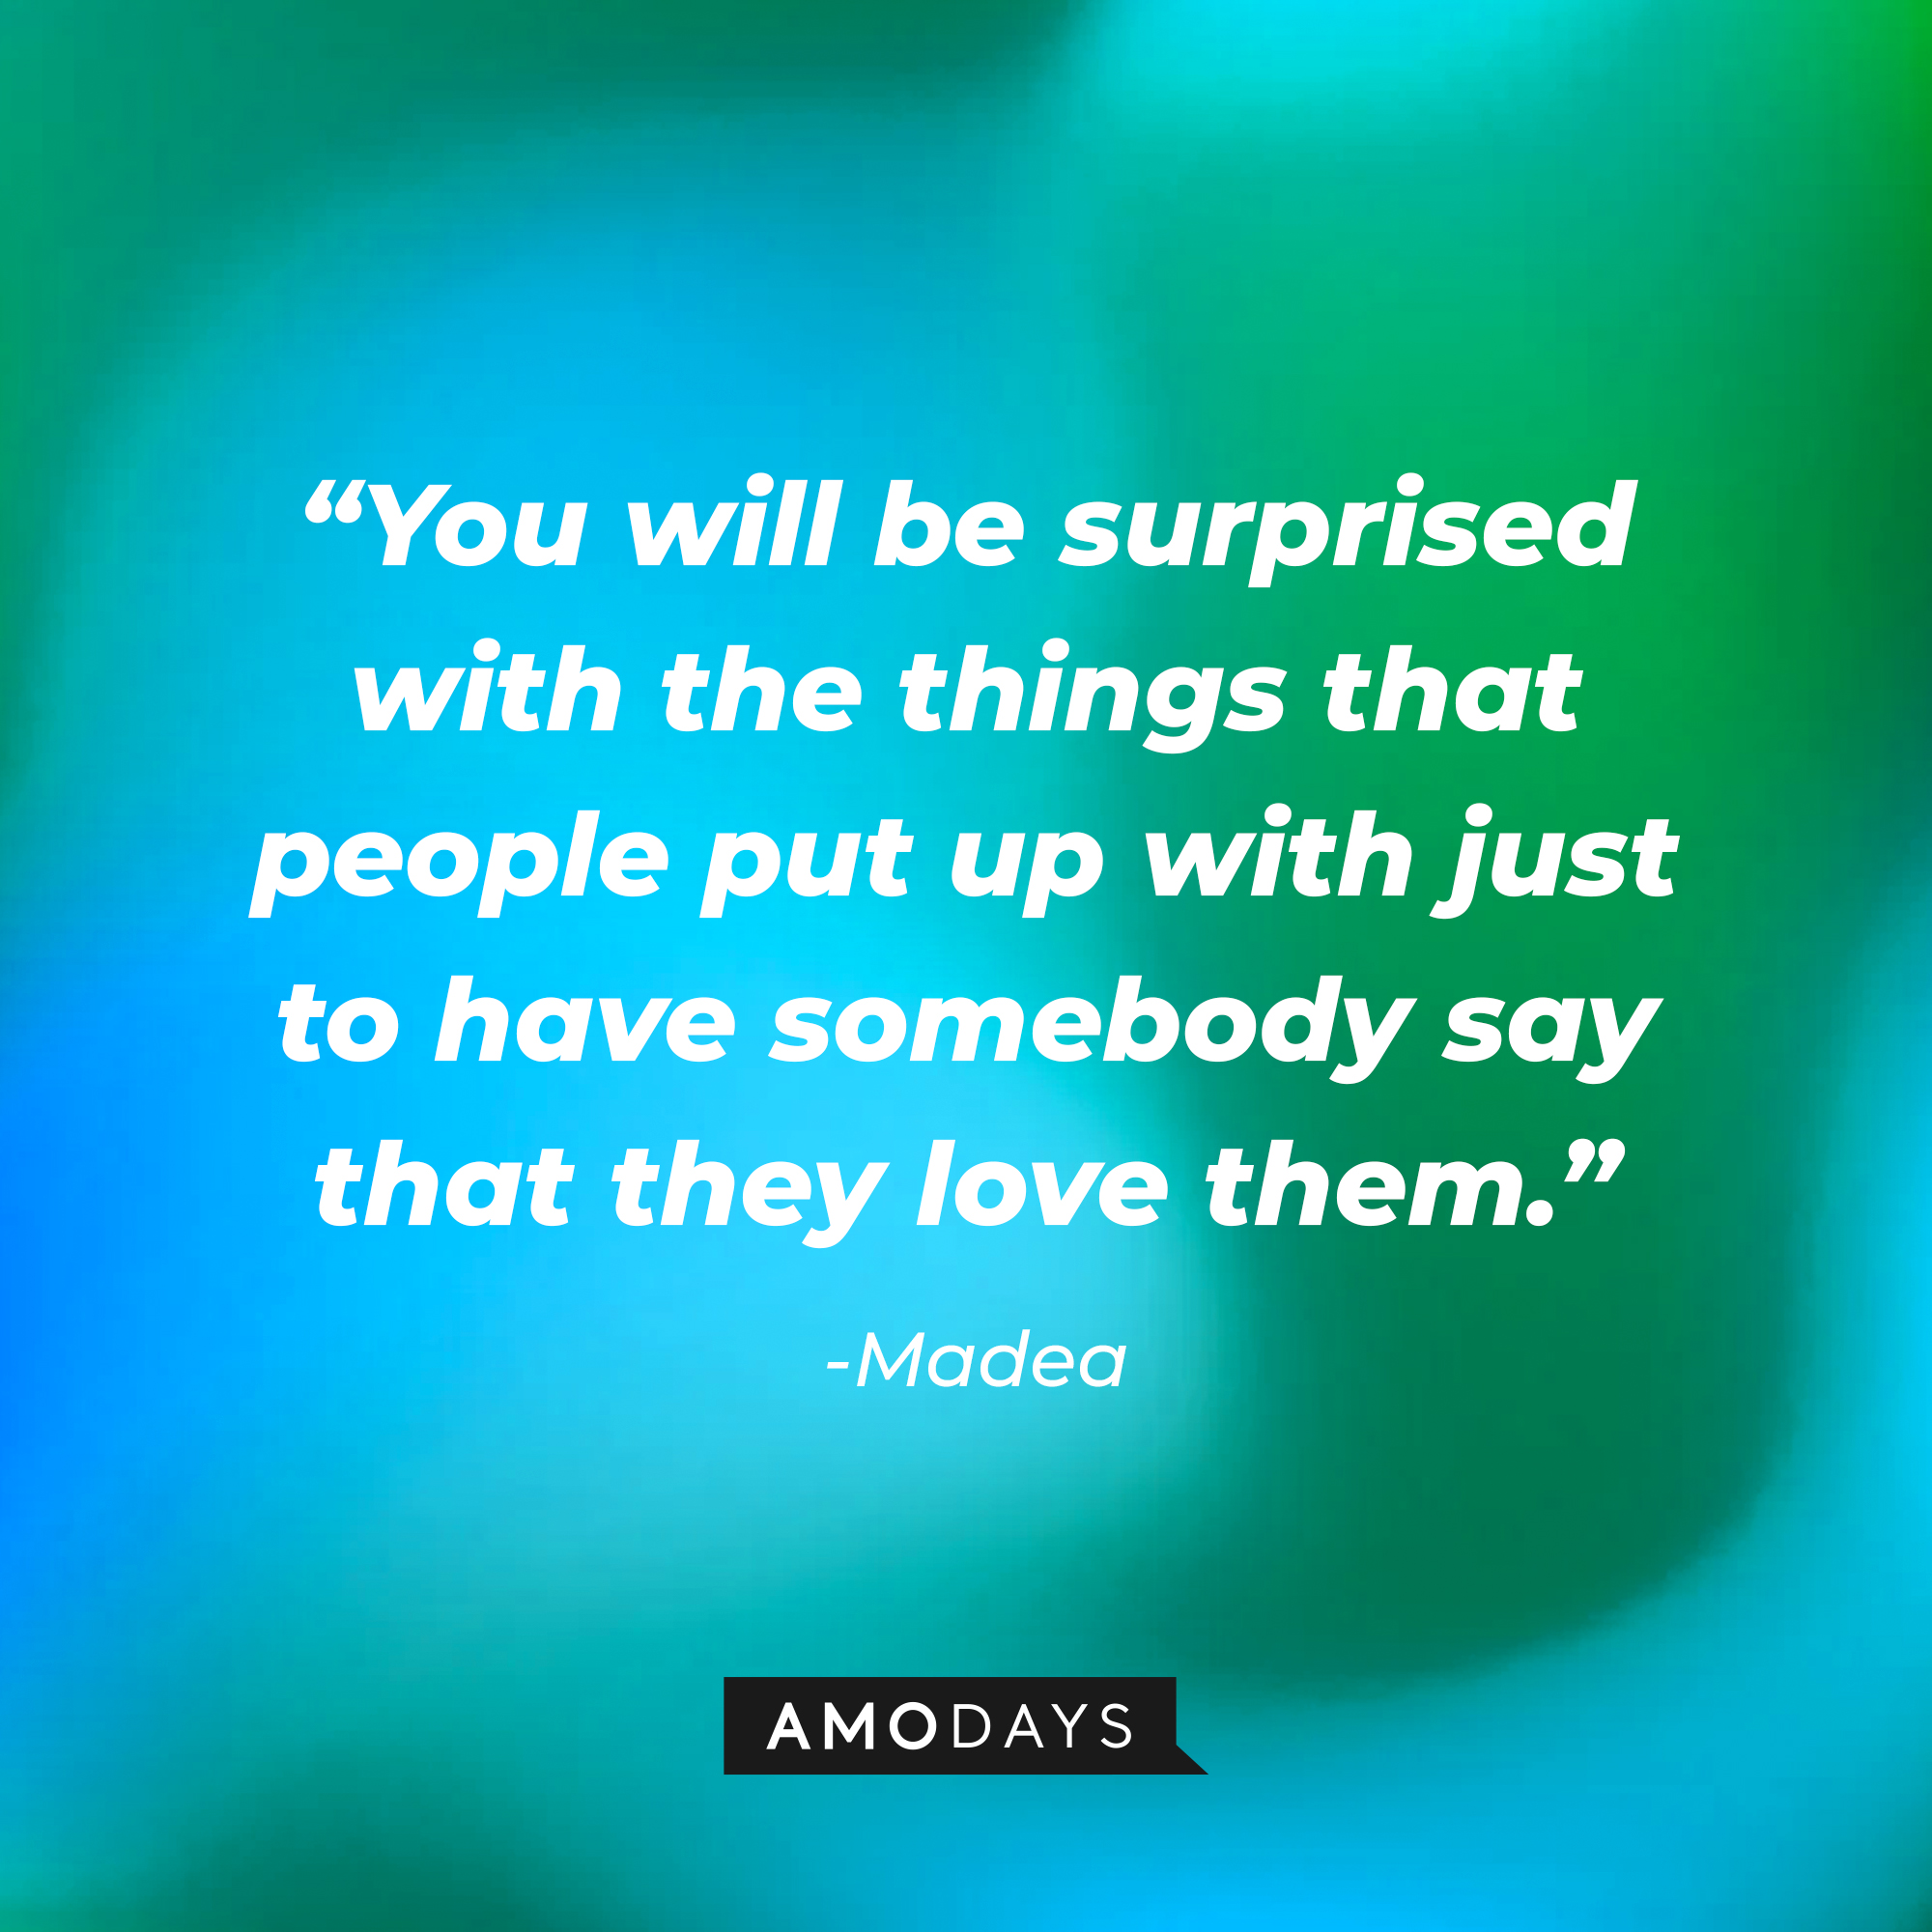 Madea’s quote: “You will be surprised with the things that people put up with just to have somebody say that they love them." | Source: AmoDays